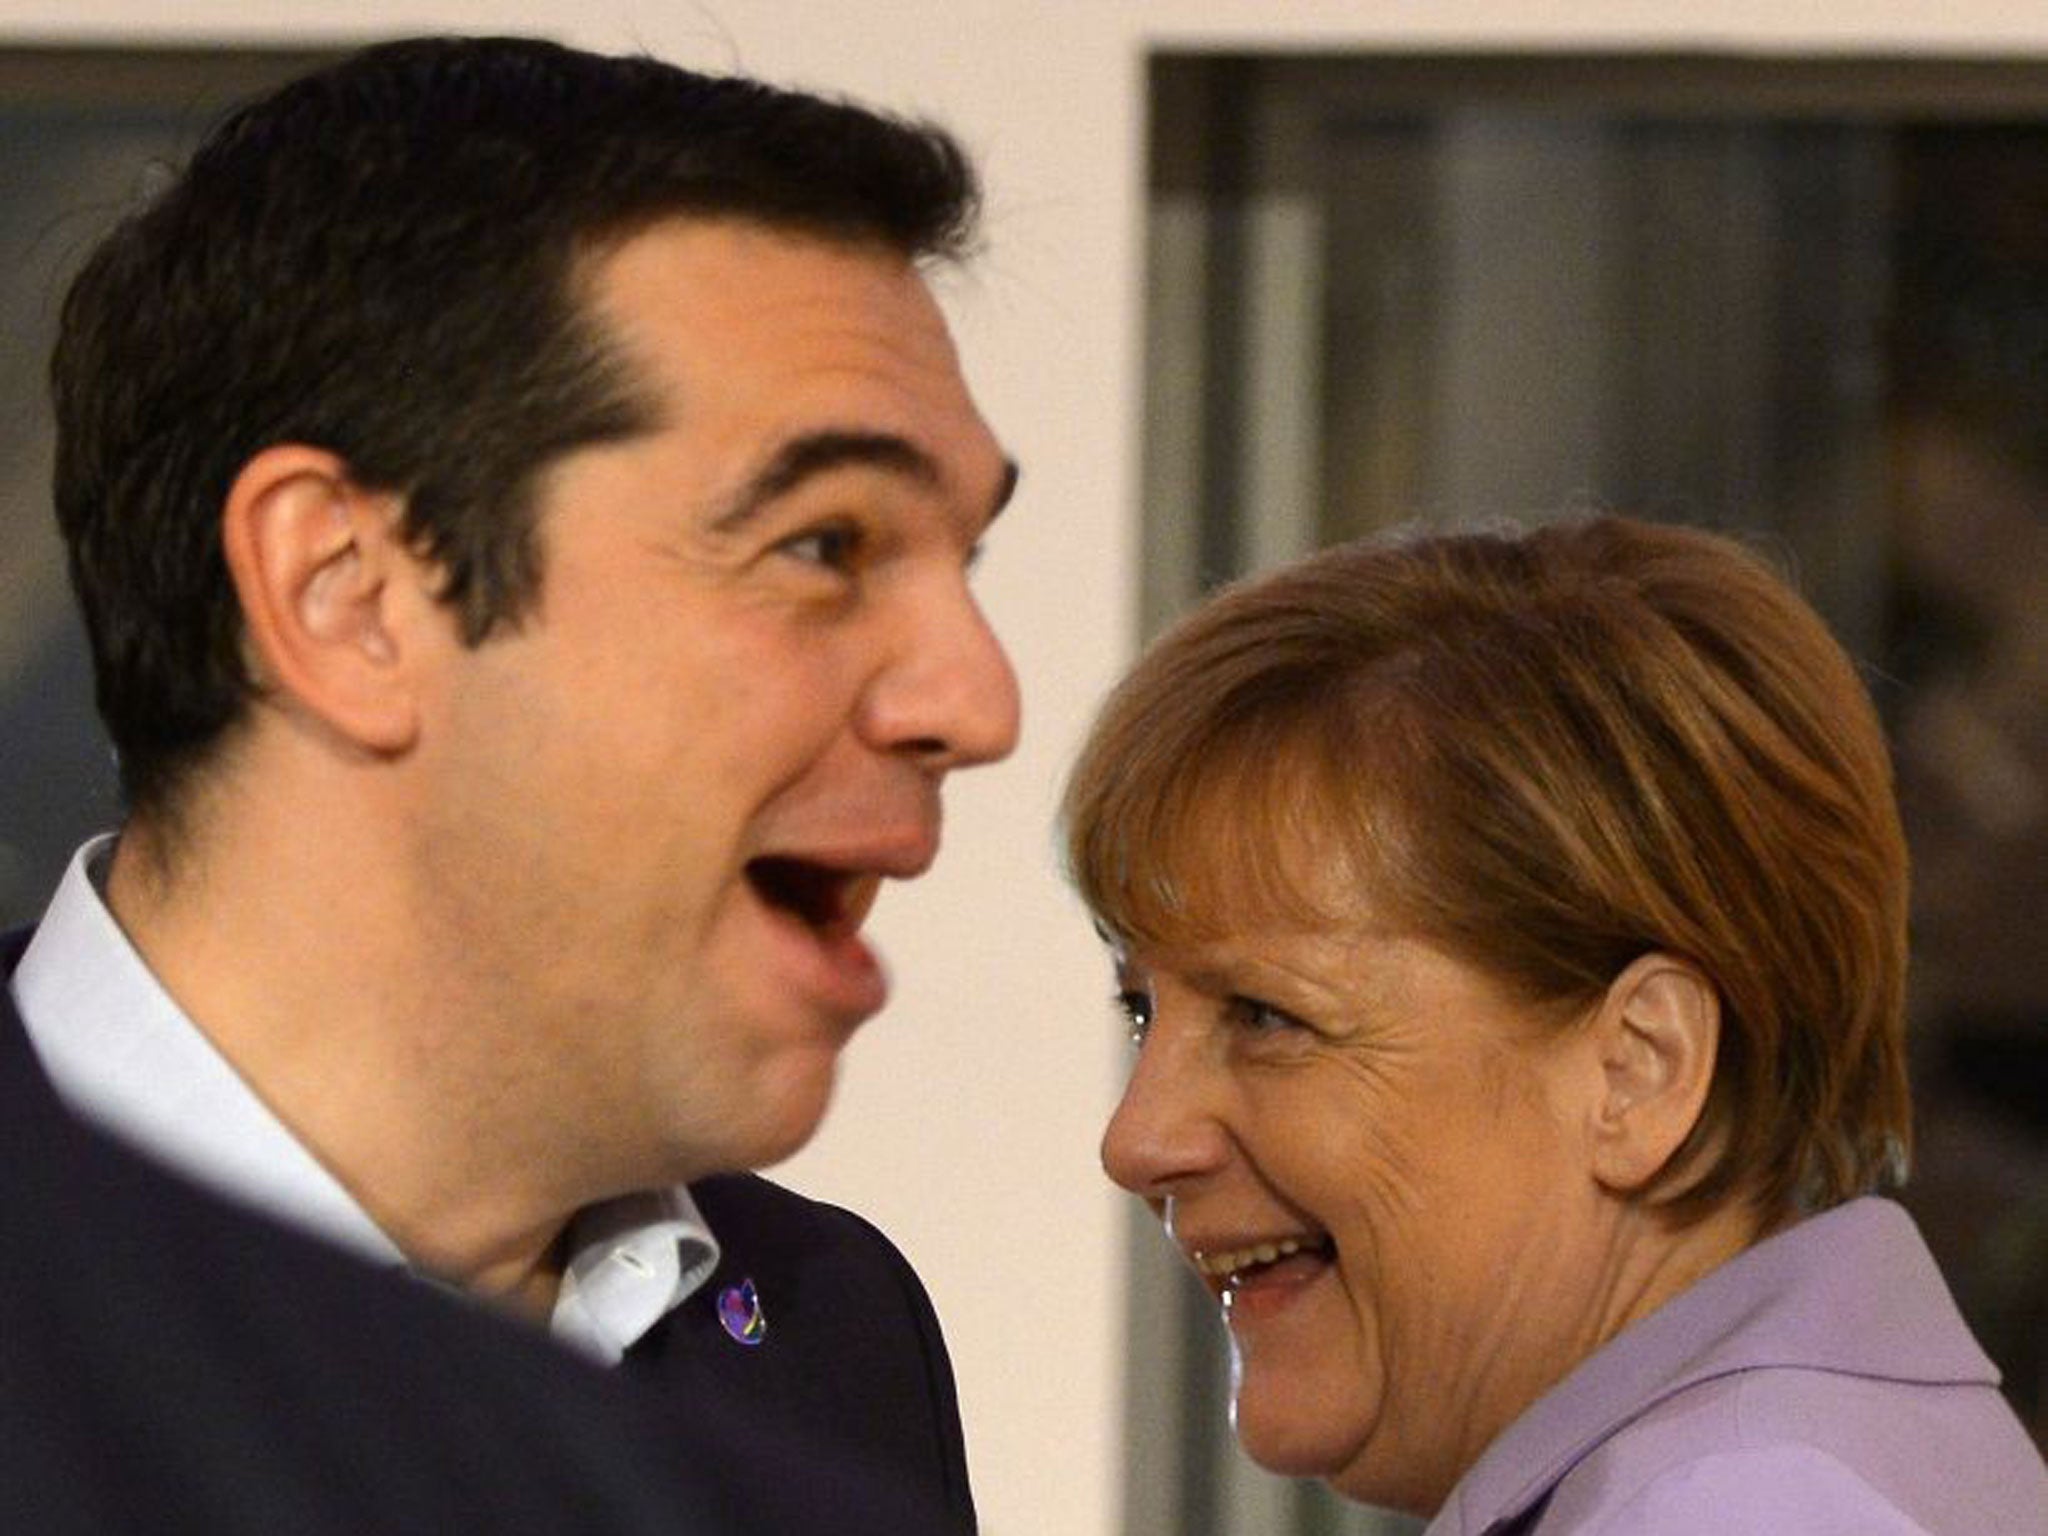 Greece's Alexis Tsipras and Germany's Angela Merkel kept investors guessing last year - what fresh problems will the new year bring?